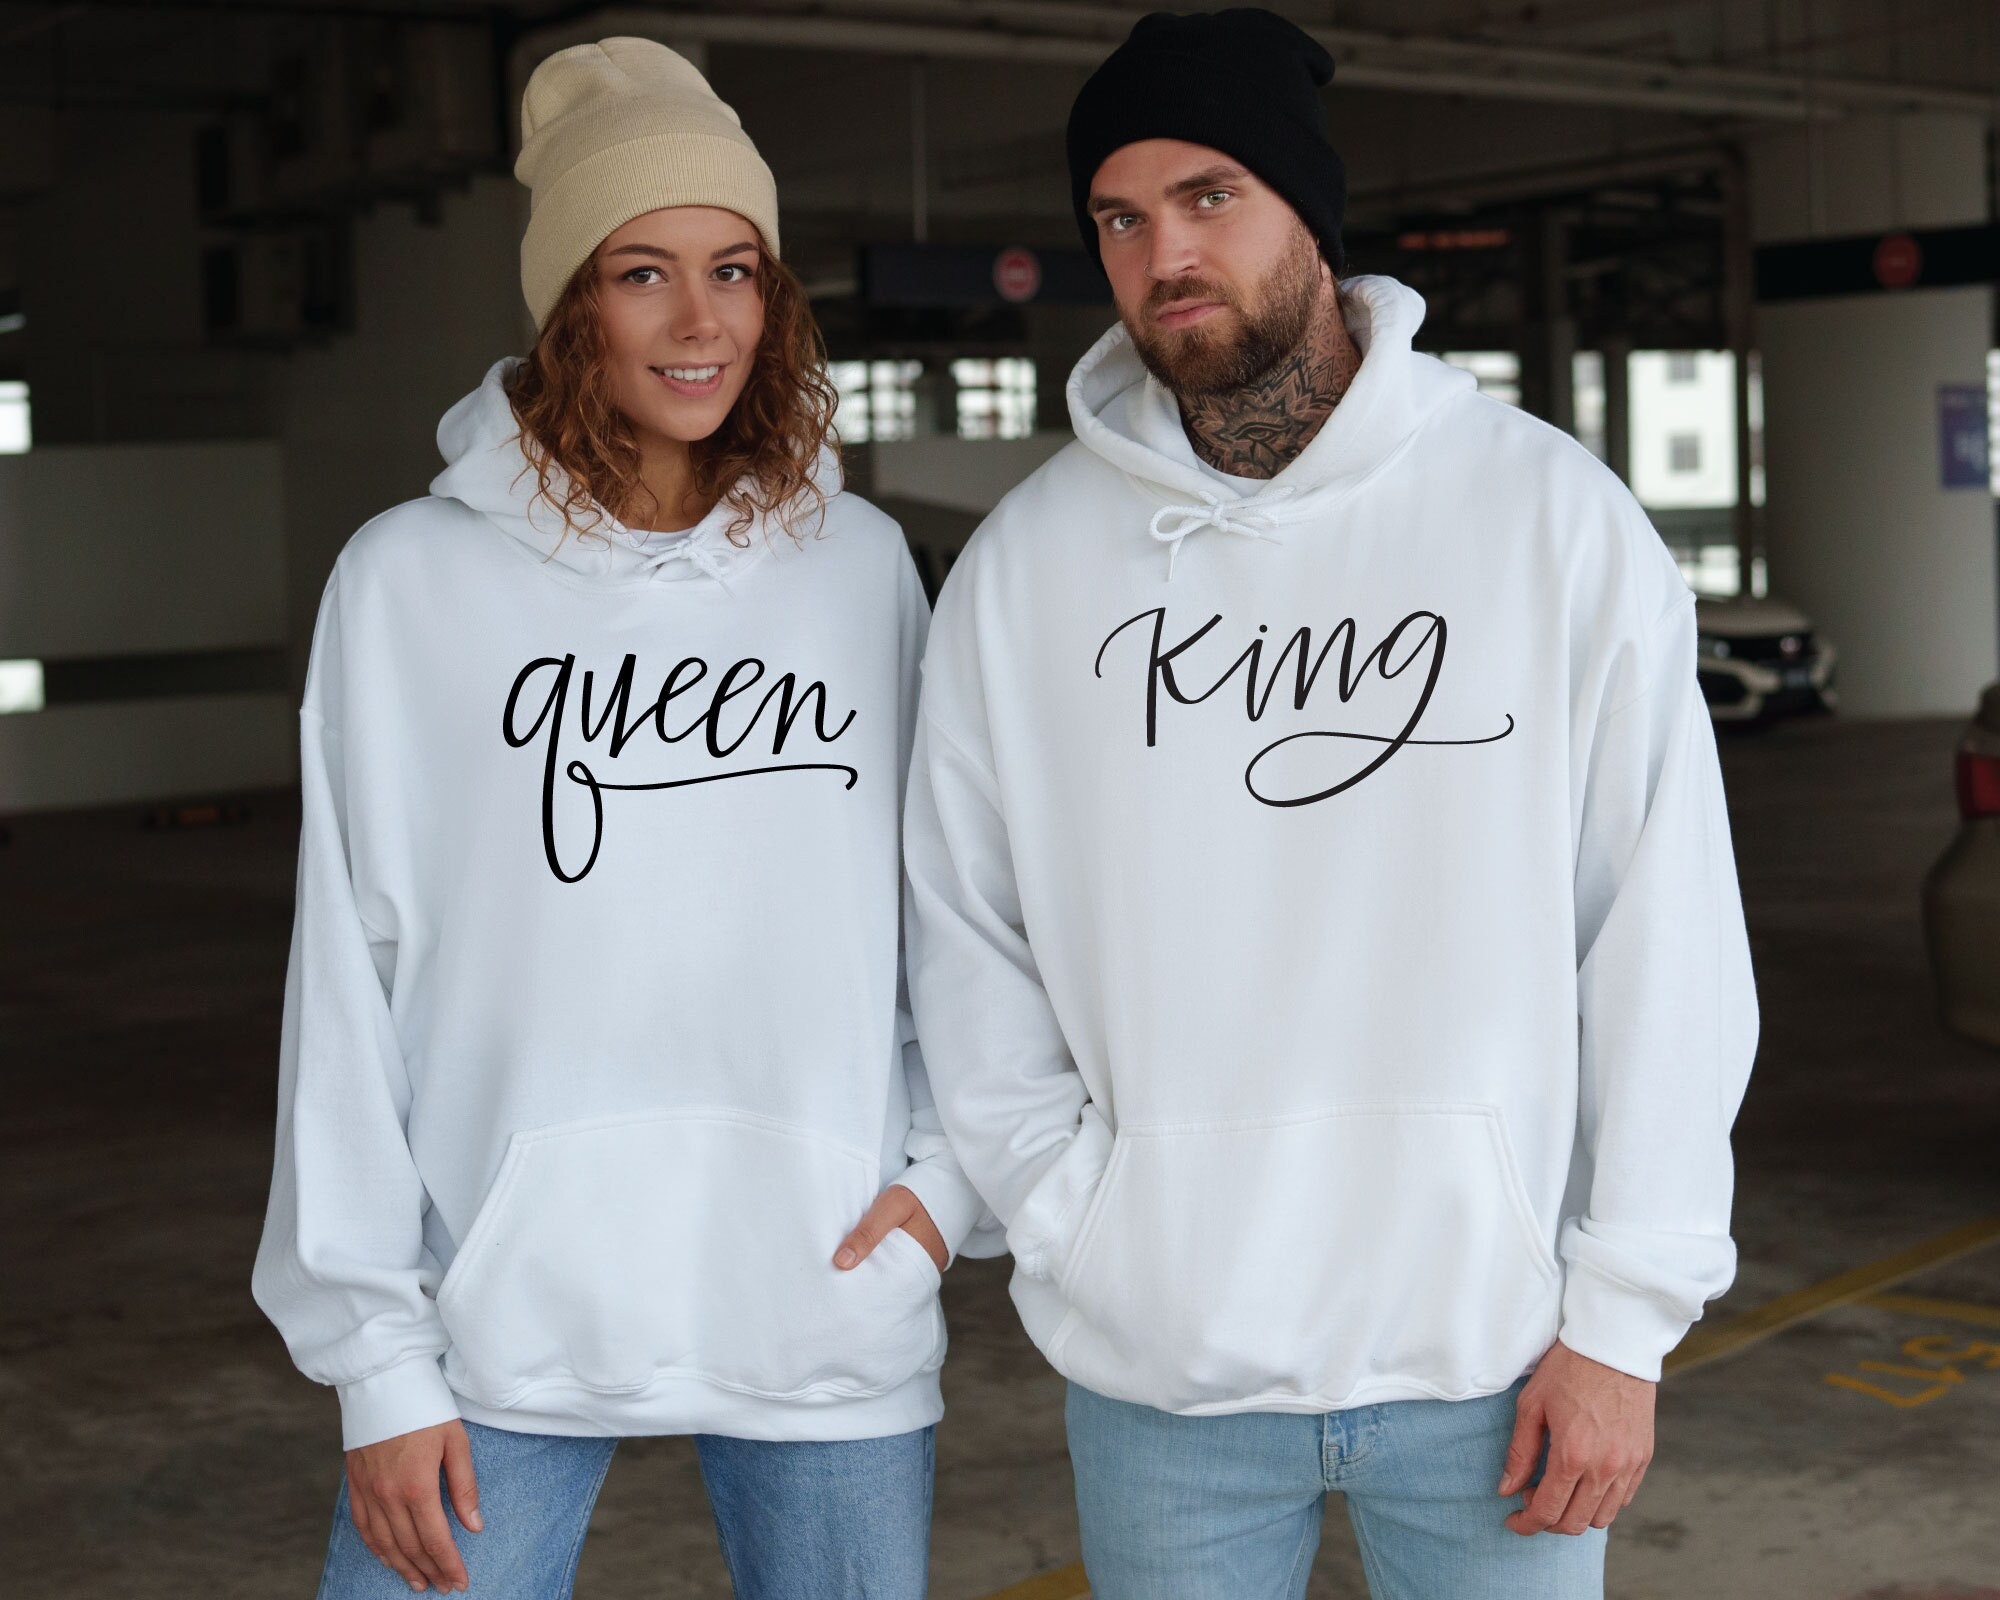 Her King And His Queen Couples Hoodies Best Valentines Day Gifts For Love Couples Family Christmas Pajamas By Jenny | Couple Hoodies King And Queen | phongkhamdakhoasaigon.com